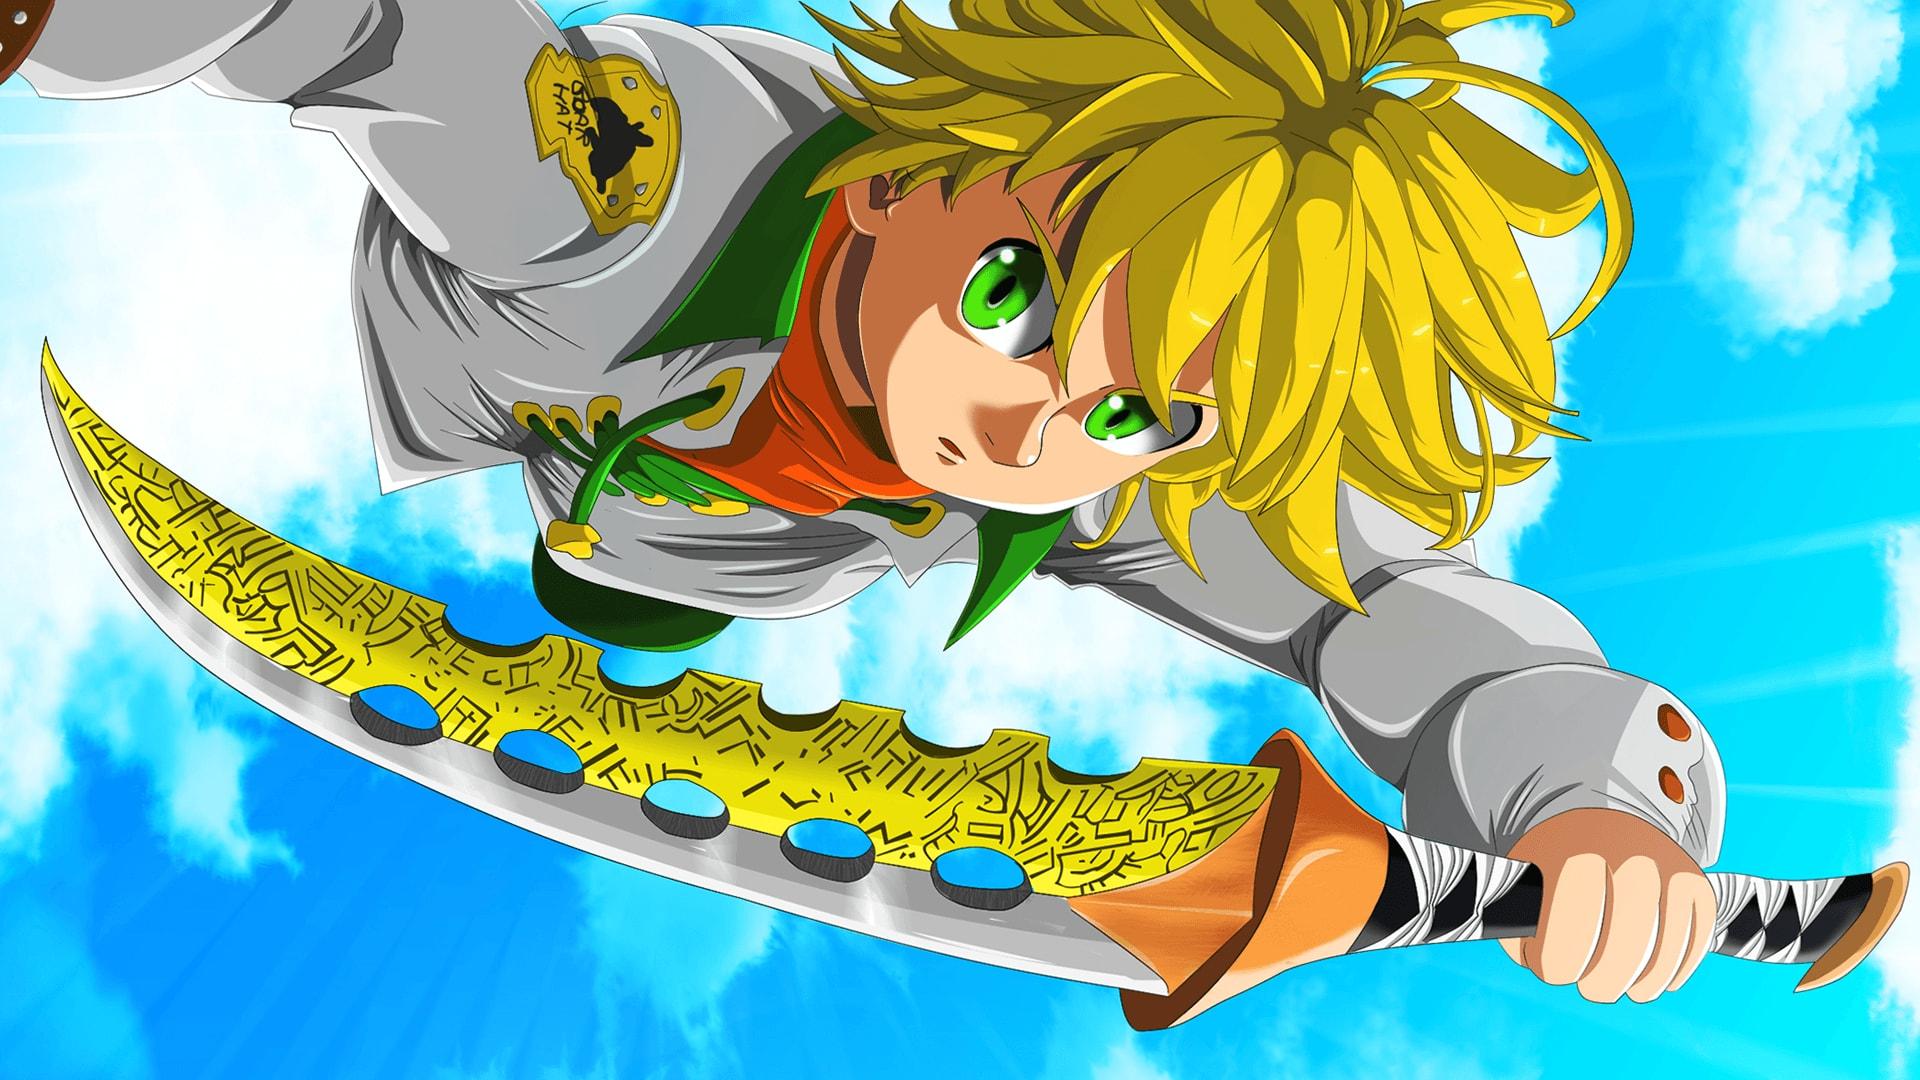 Wallpaper of Meliodas, The Seven Deadly Sins background & HD image